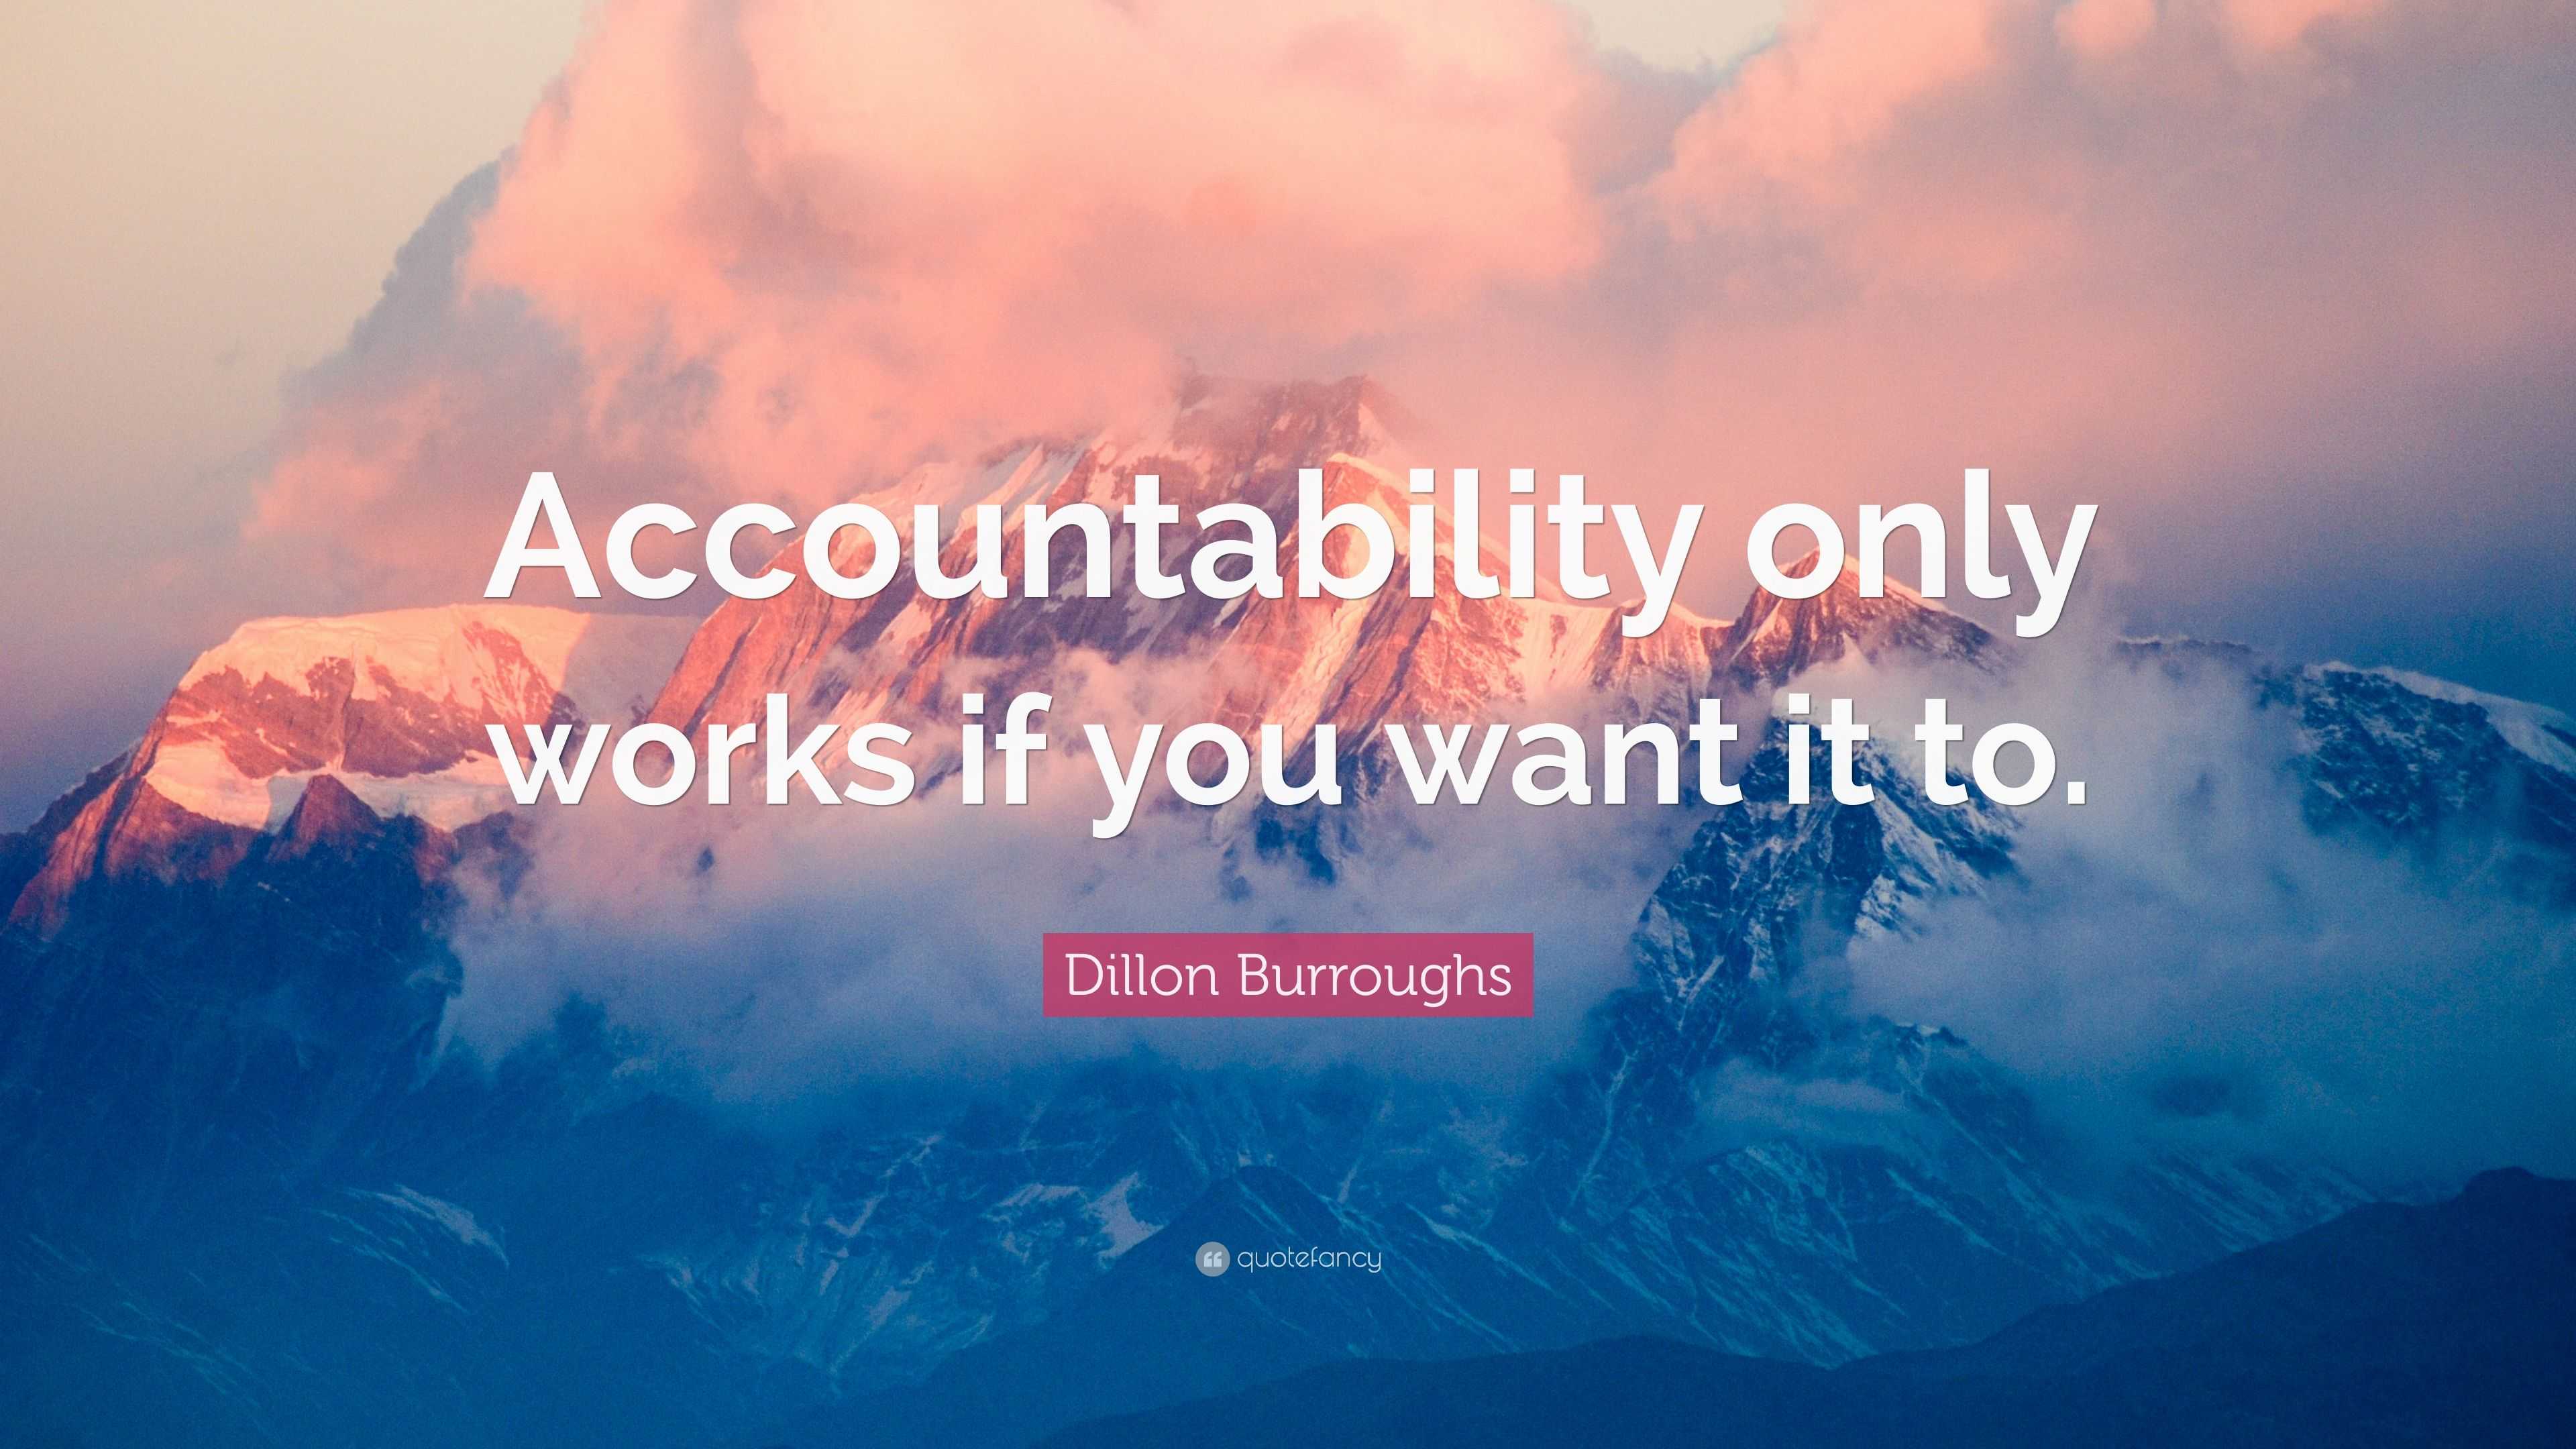 Dillon Burroughs Quote: “Accountability only works if you want it to.”